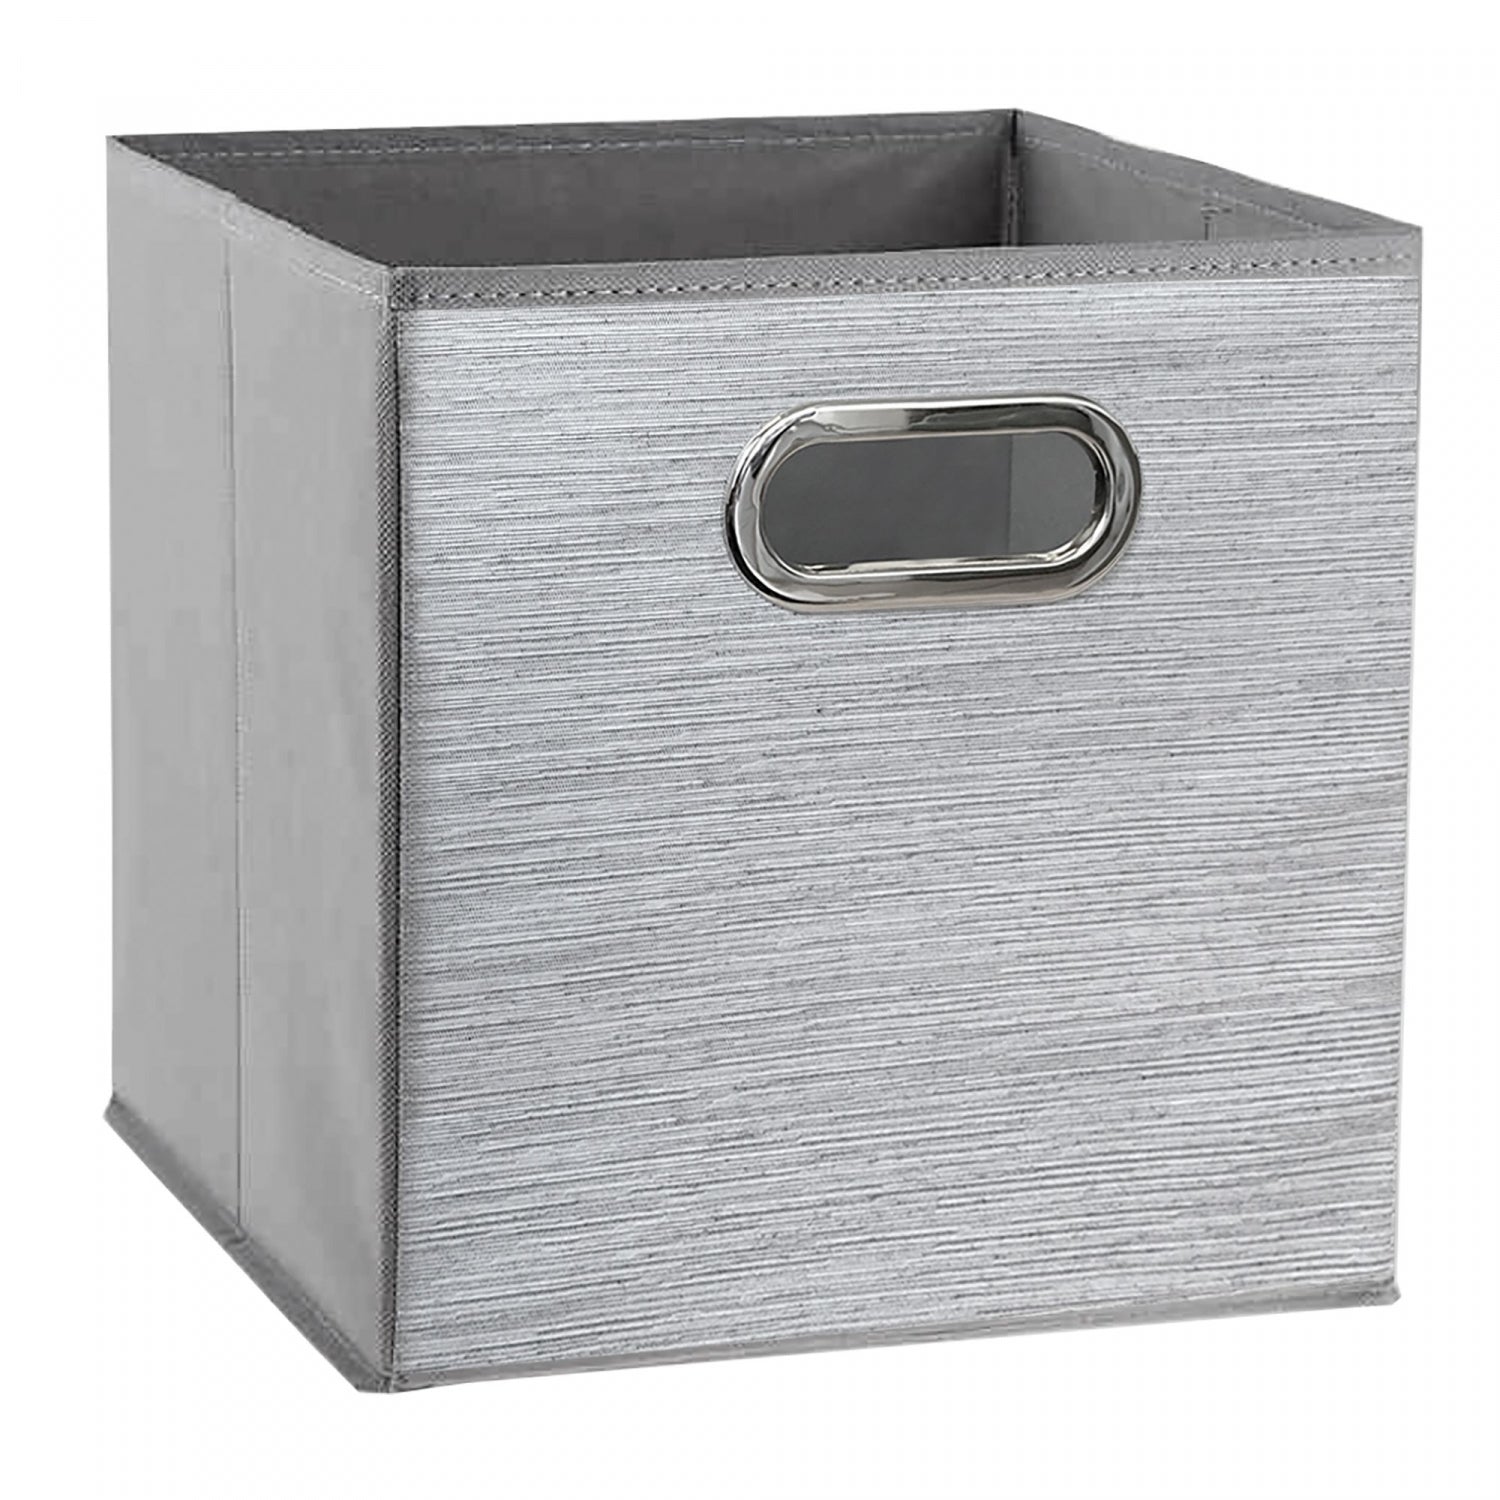 Relaxed Living 11-Inch Collapsible Storage Bin Collection | MrOrganic Store